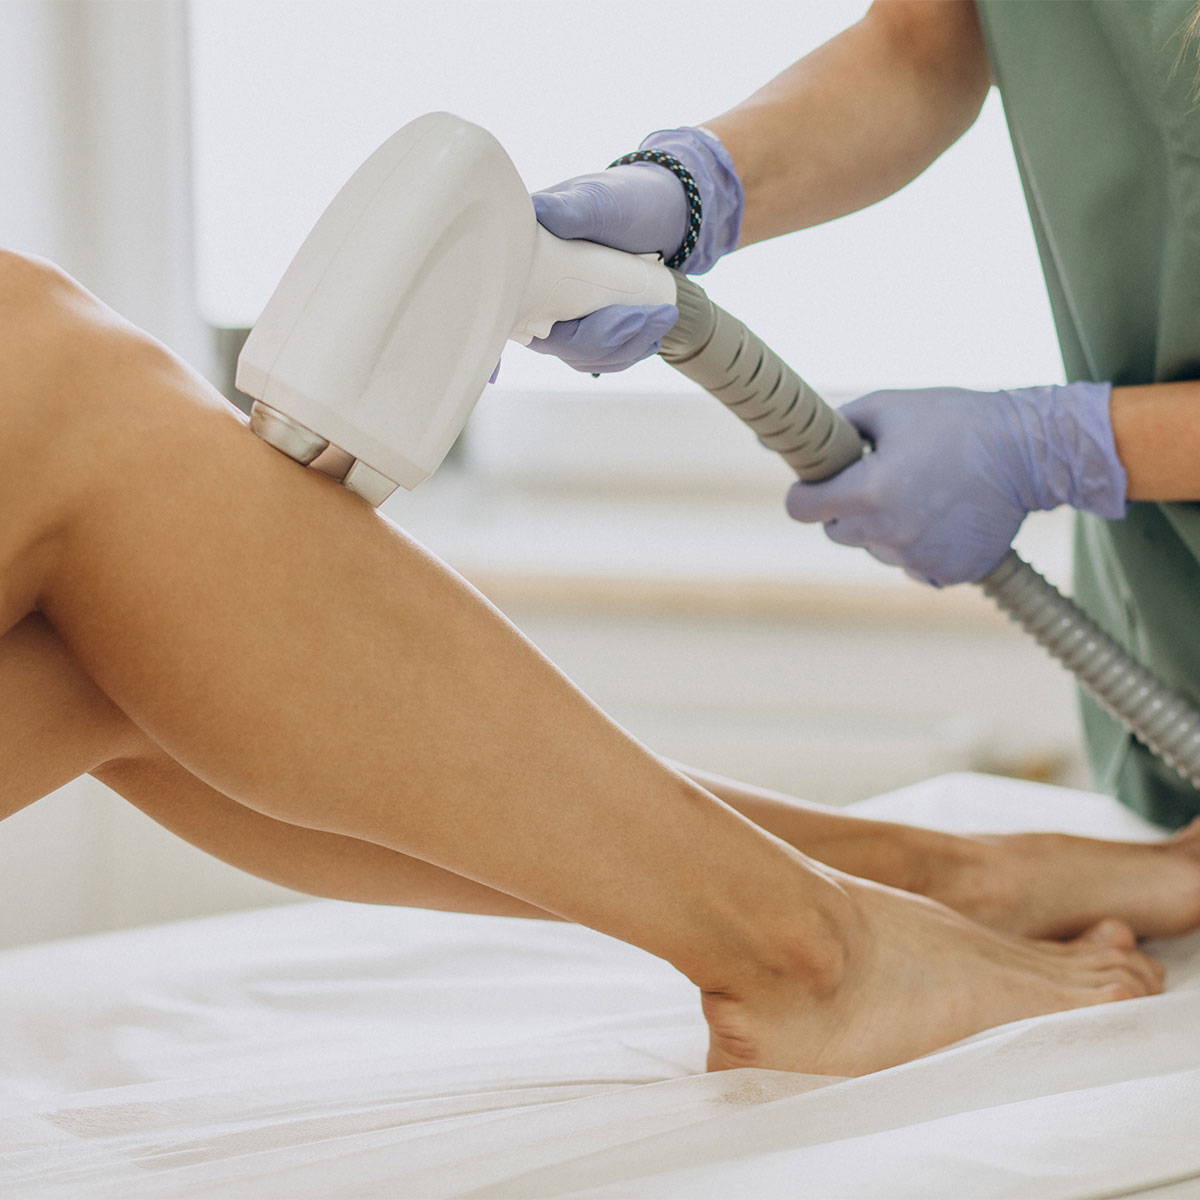 What Are The Benefits Of Full Body Hair Removal – The Skin Experts